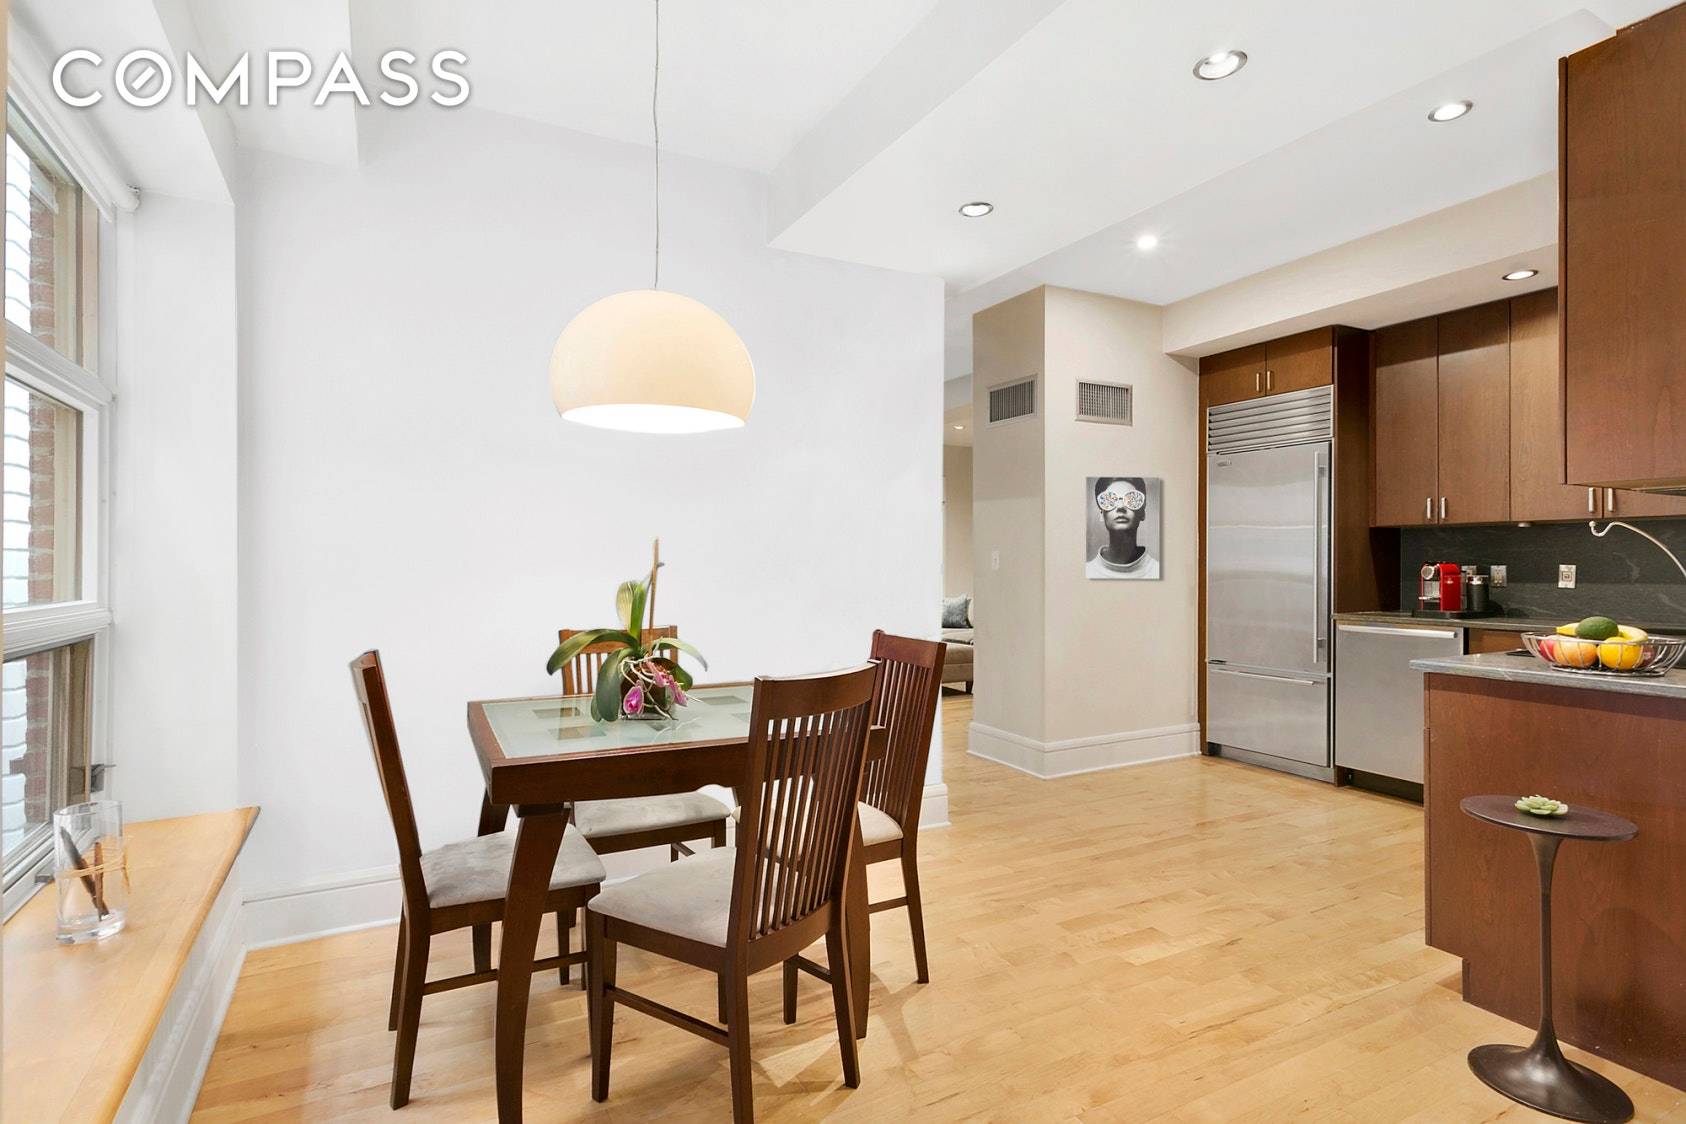 This large, loft style, converted two bedroom, one bath apartment has a rambling floor plan that lends itself to many options, with the feeling of a true home.